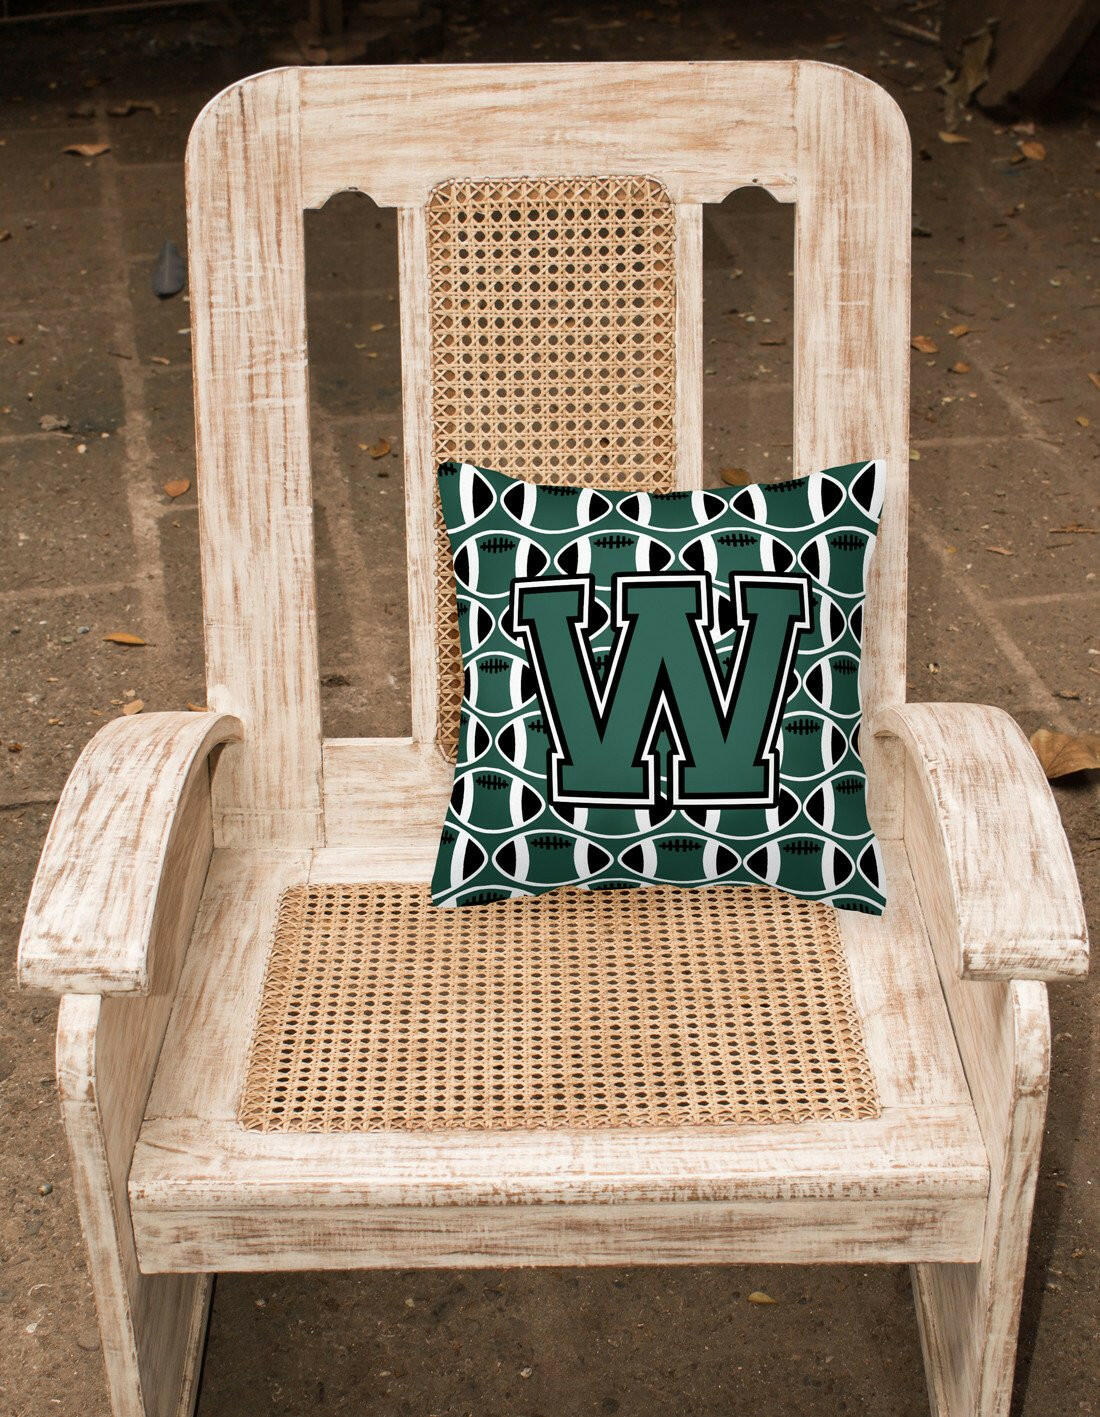 Letter W Football Green and White Fabric Decorative Pillow CJ1071-WPW1414 by Caroline's Treasures